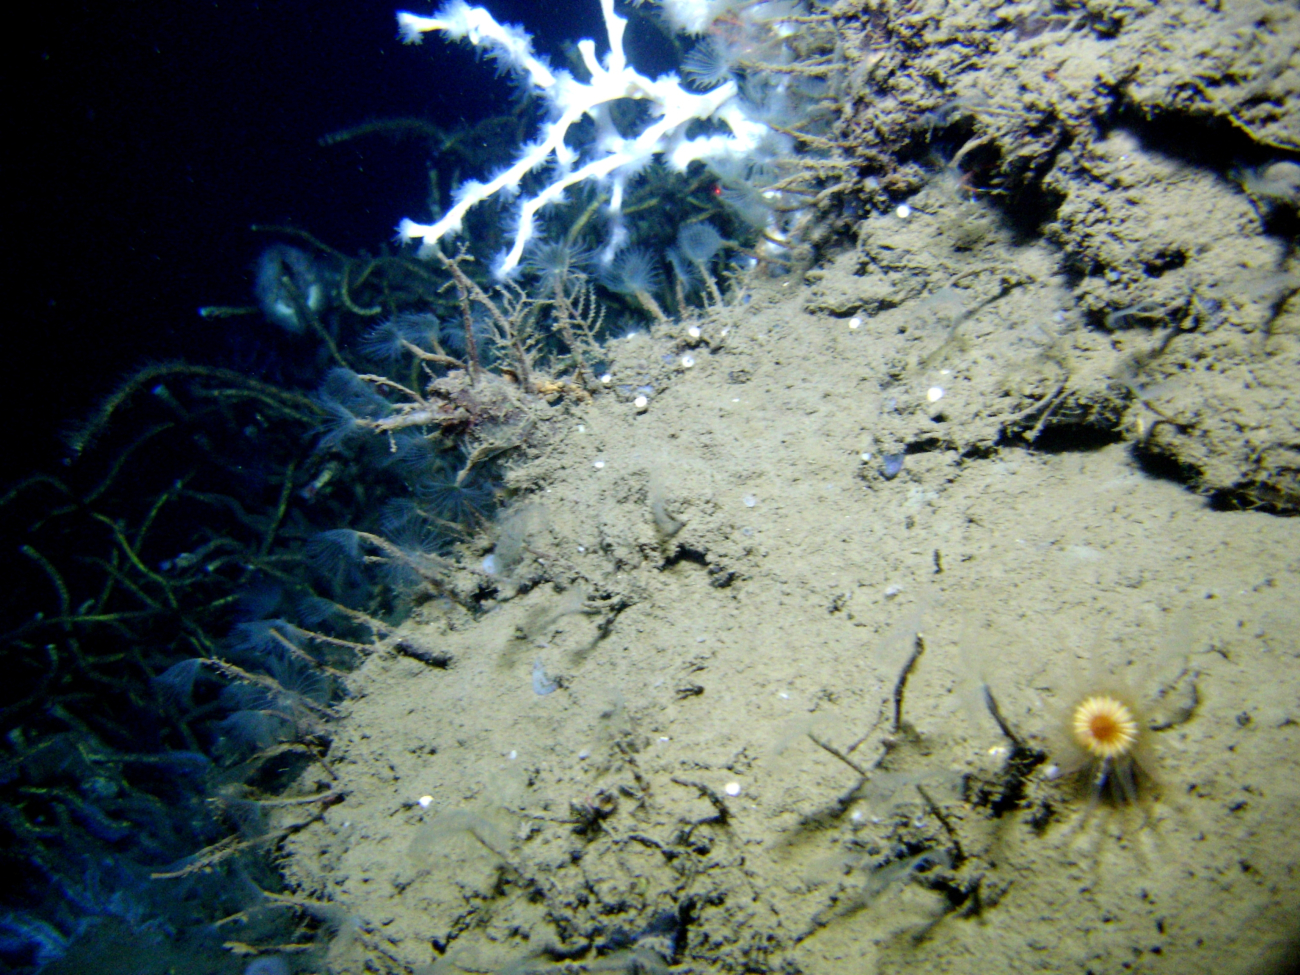 An outcrop in a cold seep area with numerous tube worms with feeding tentaclesextended, white lophelia pertusa coral with polyps extended, a tangle oflamellibrachian tube worms seen below and to the left, and an orangeyellow cup coral